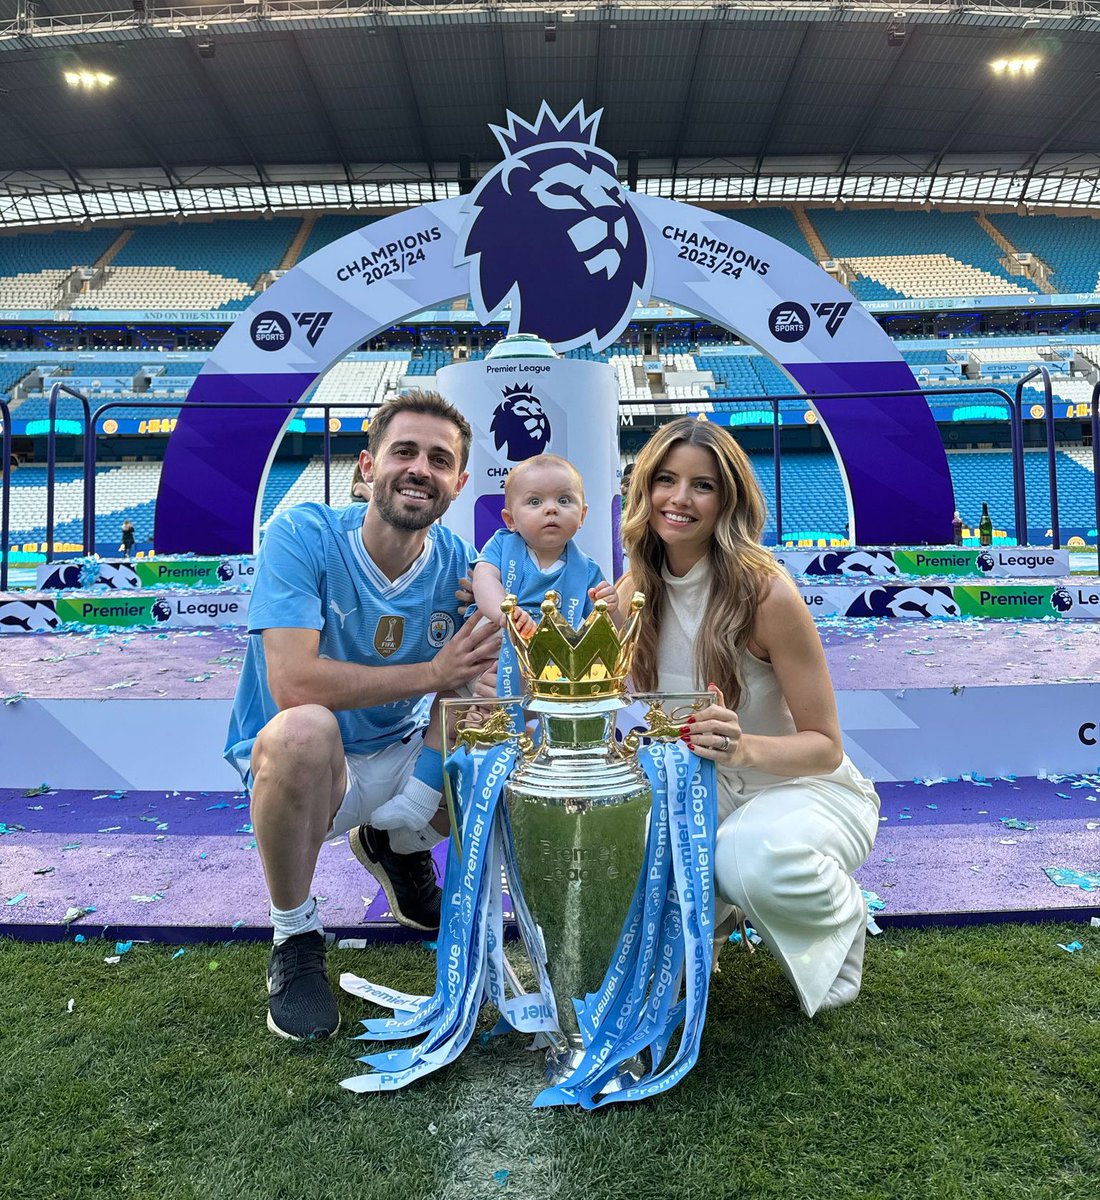 4 in a row and 6 in 7 years!
What a day 😄💙🏆
@premierleague @ManCity